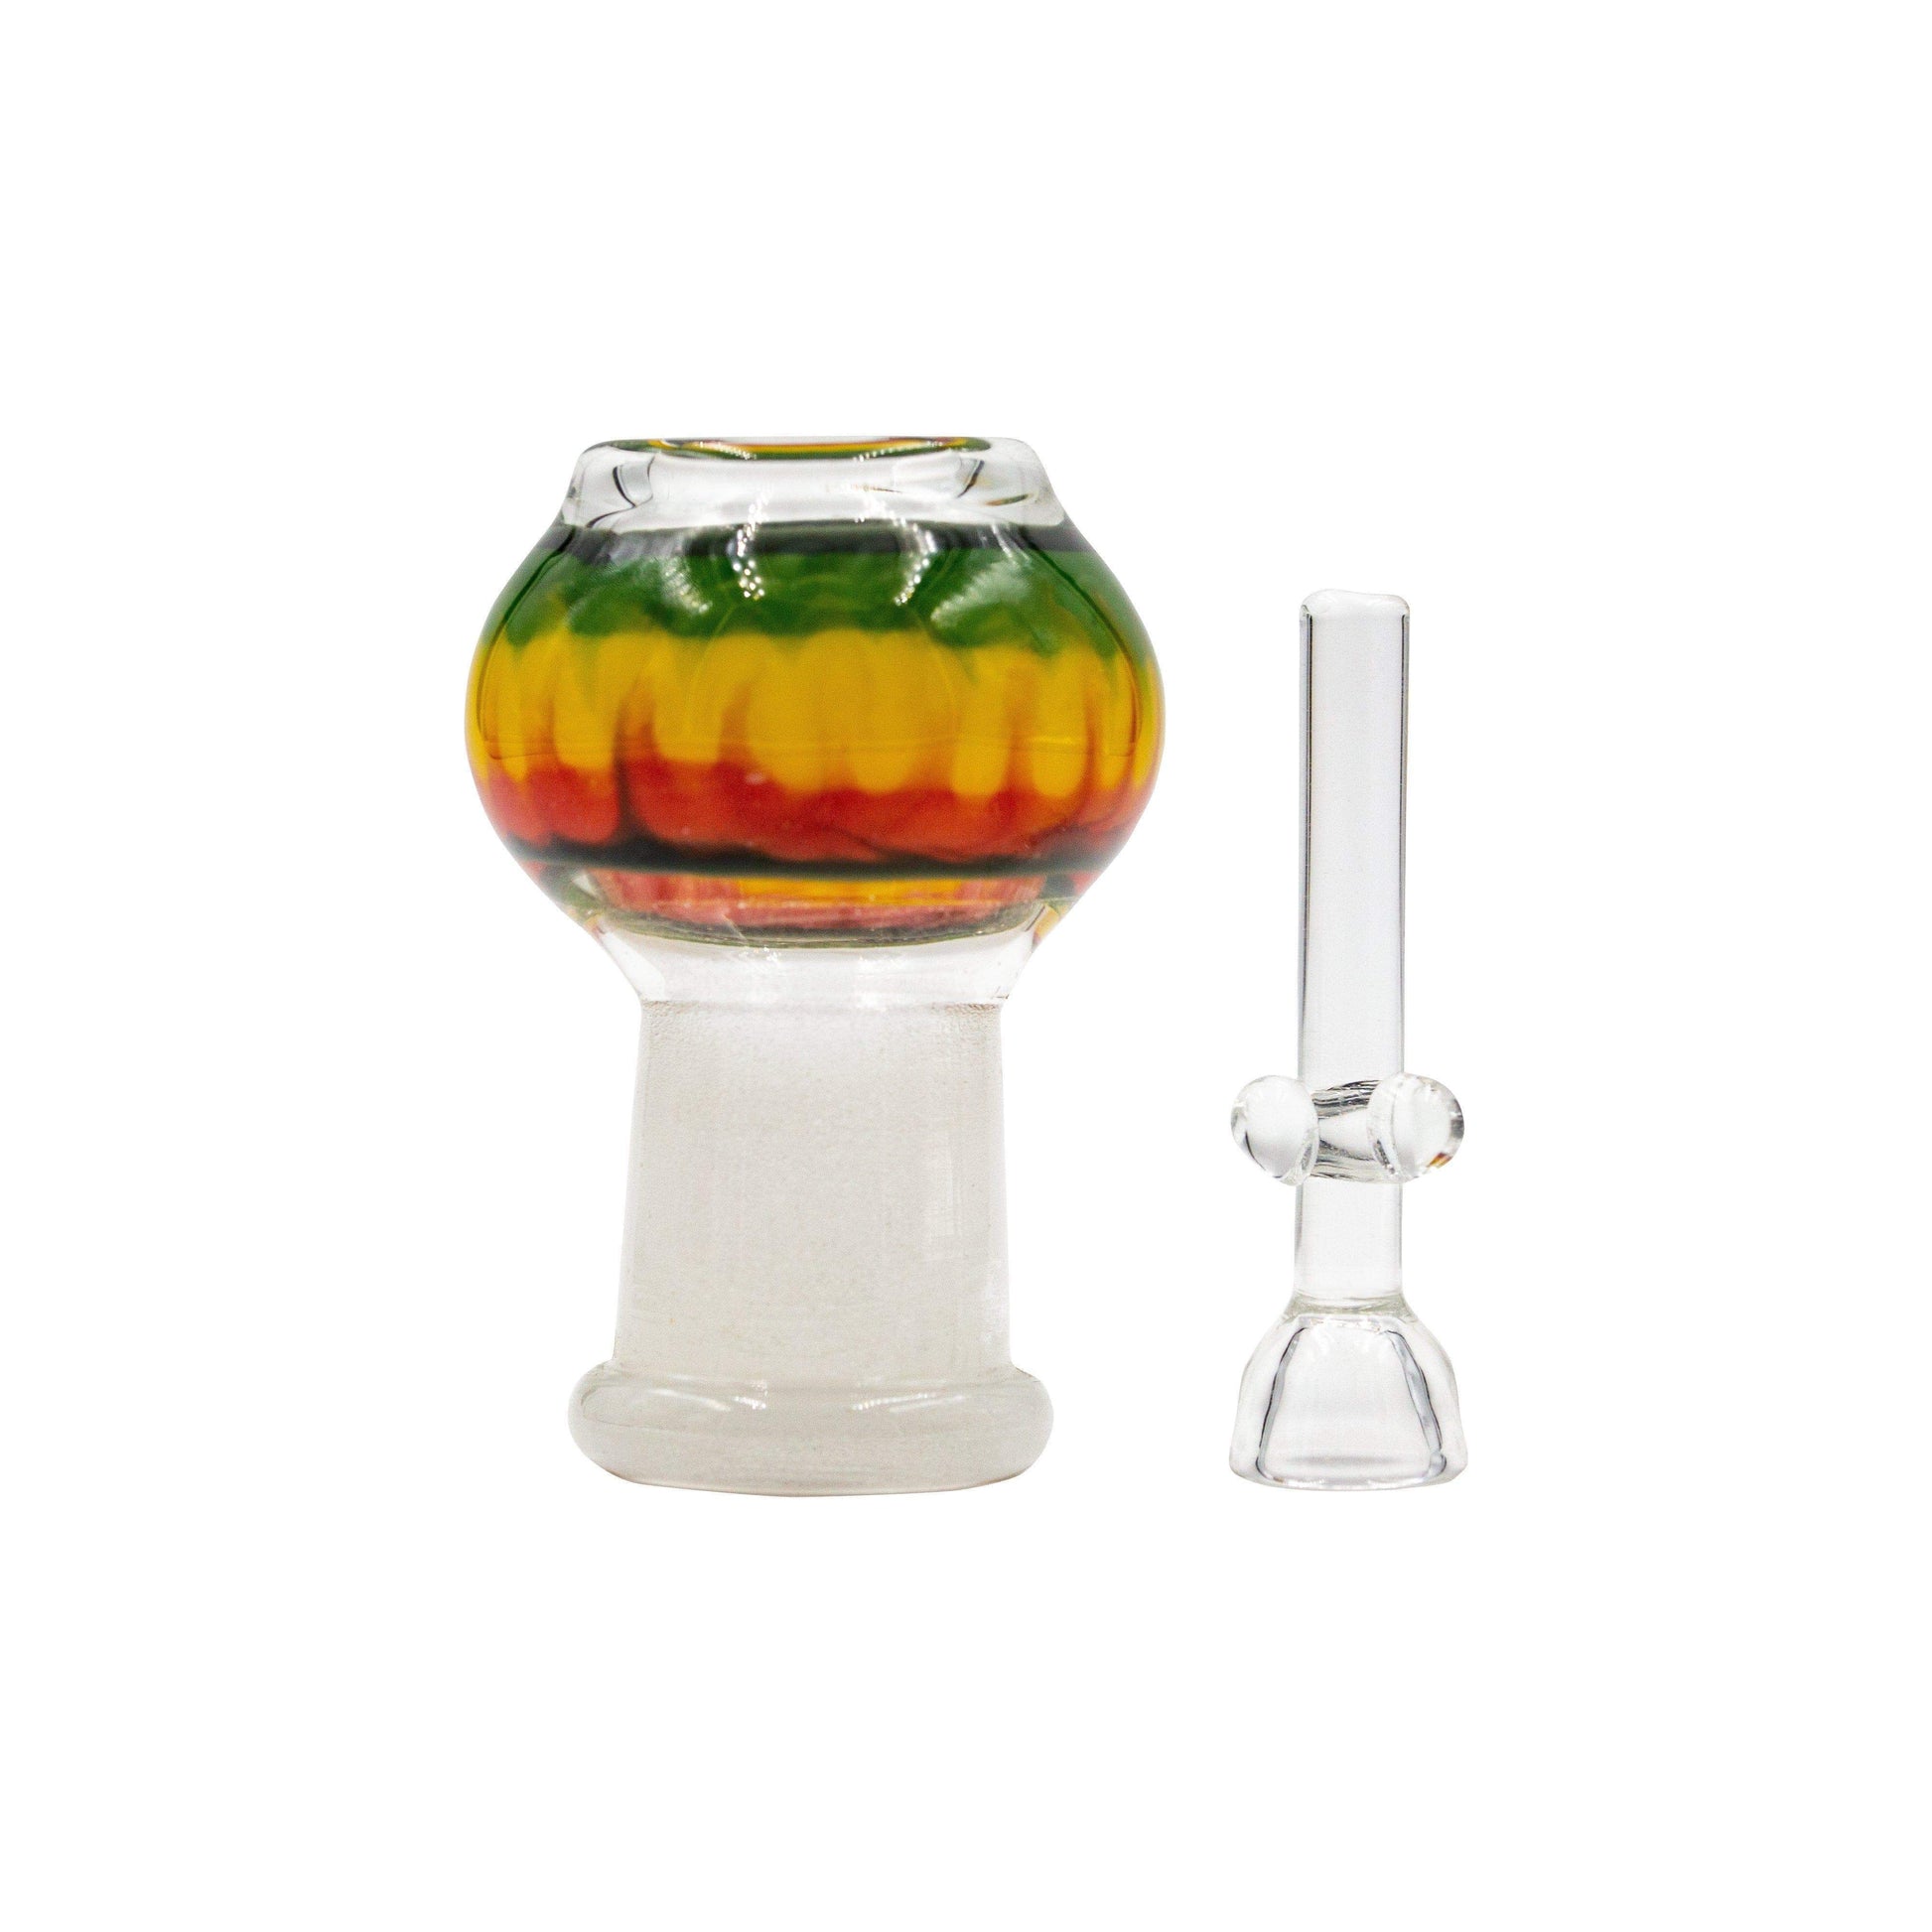 Classic dome nail dab rig accessory with funky rasta colors fits most rigs